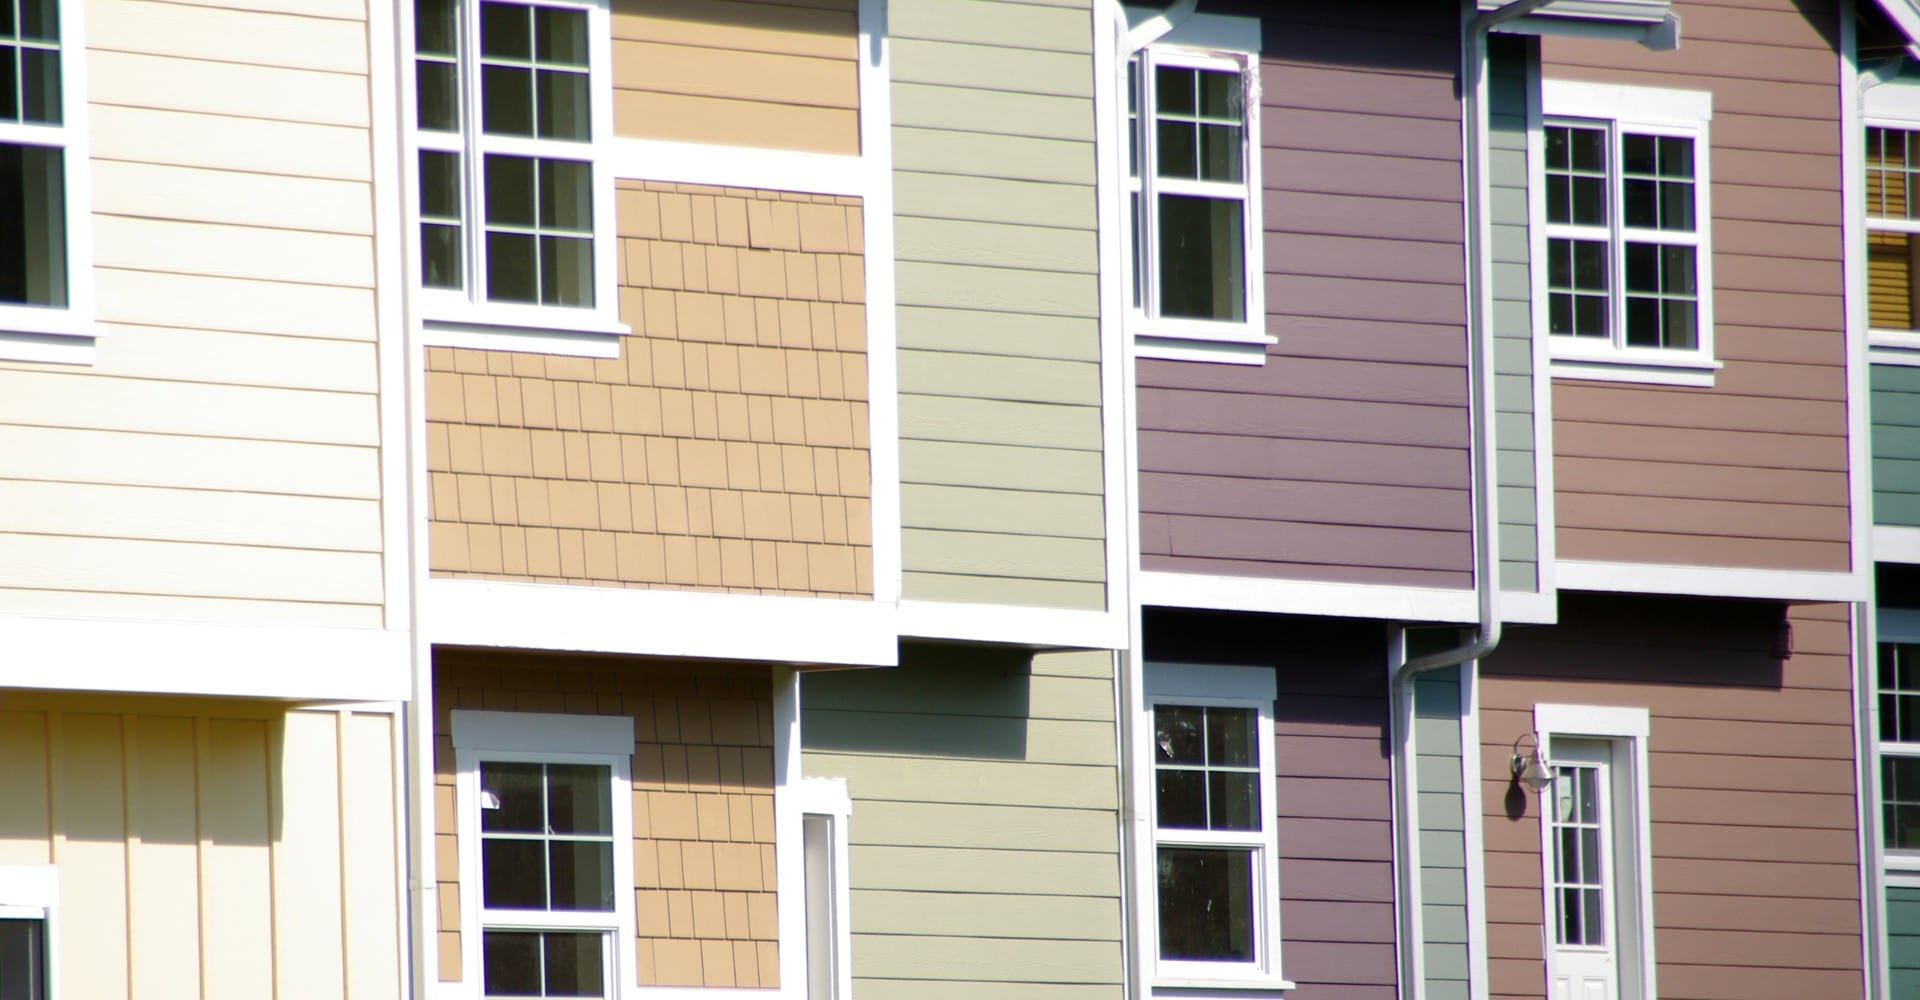 4 Stunning Siding Options for Any Home